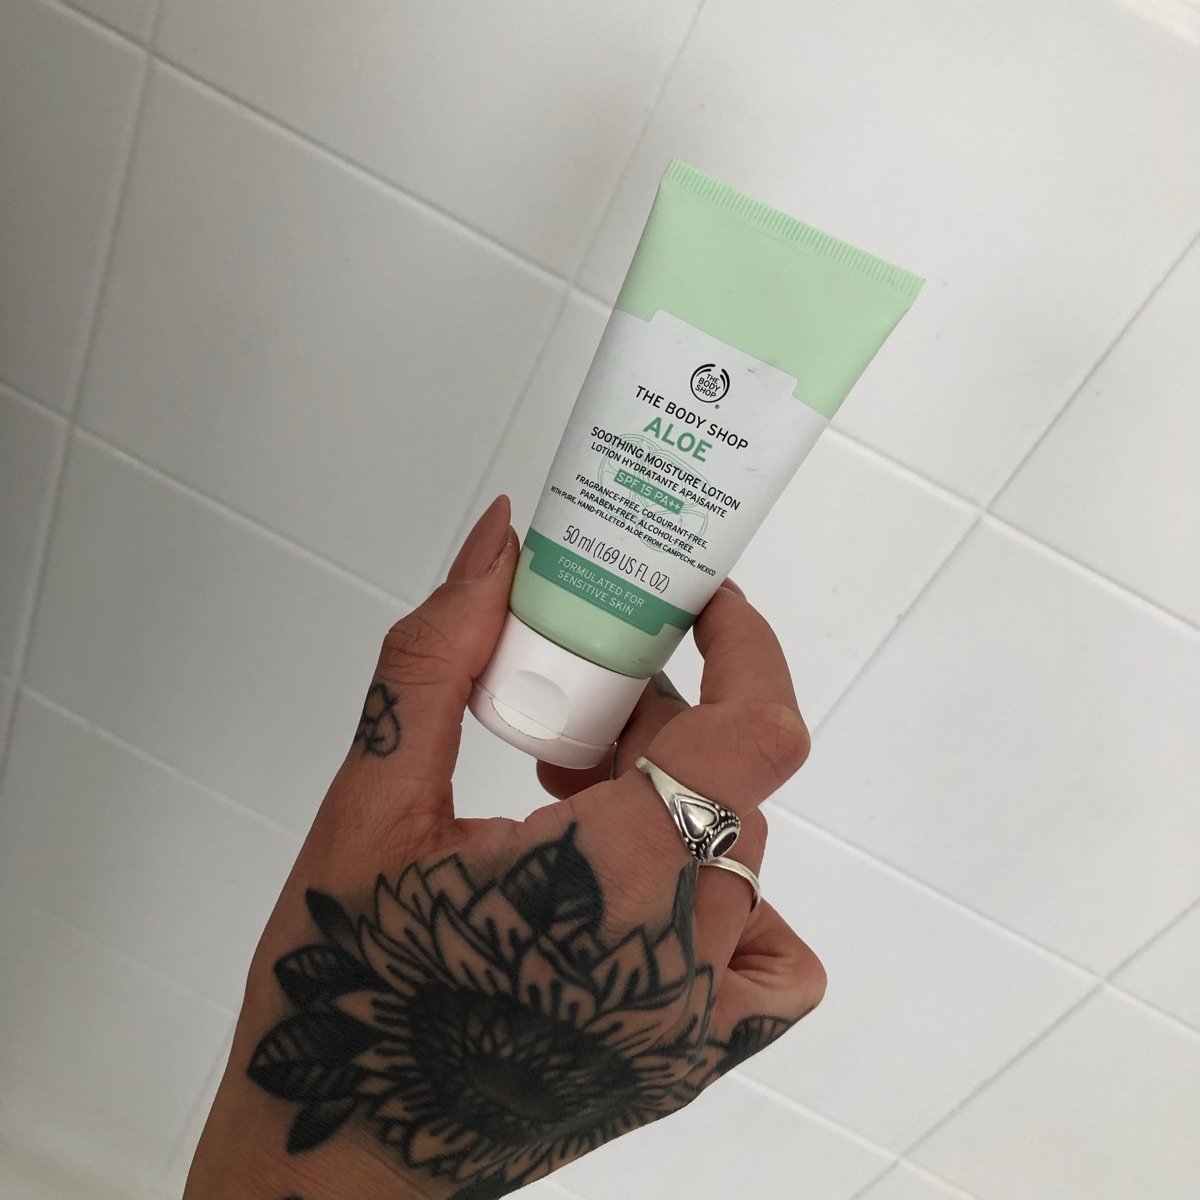 The Body Shop Aloe Soothing Moisture Lotion Reviews | abillion